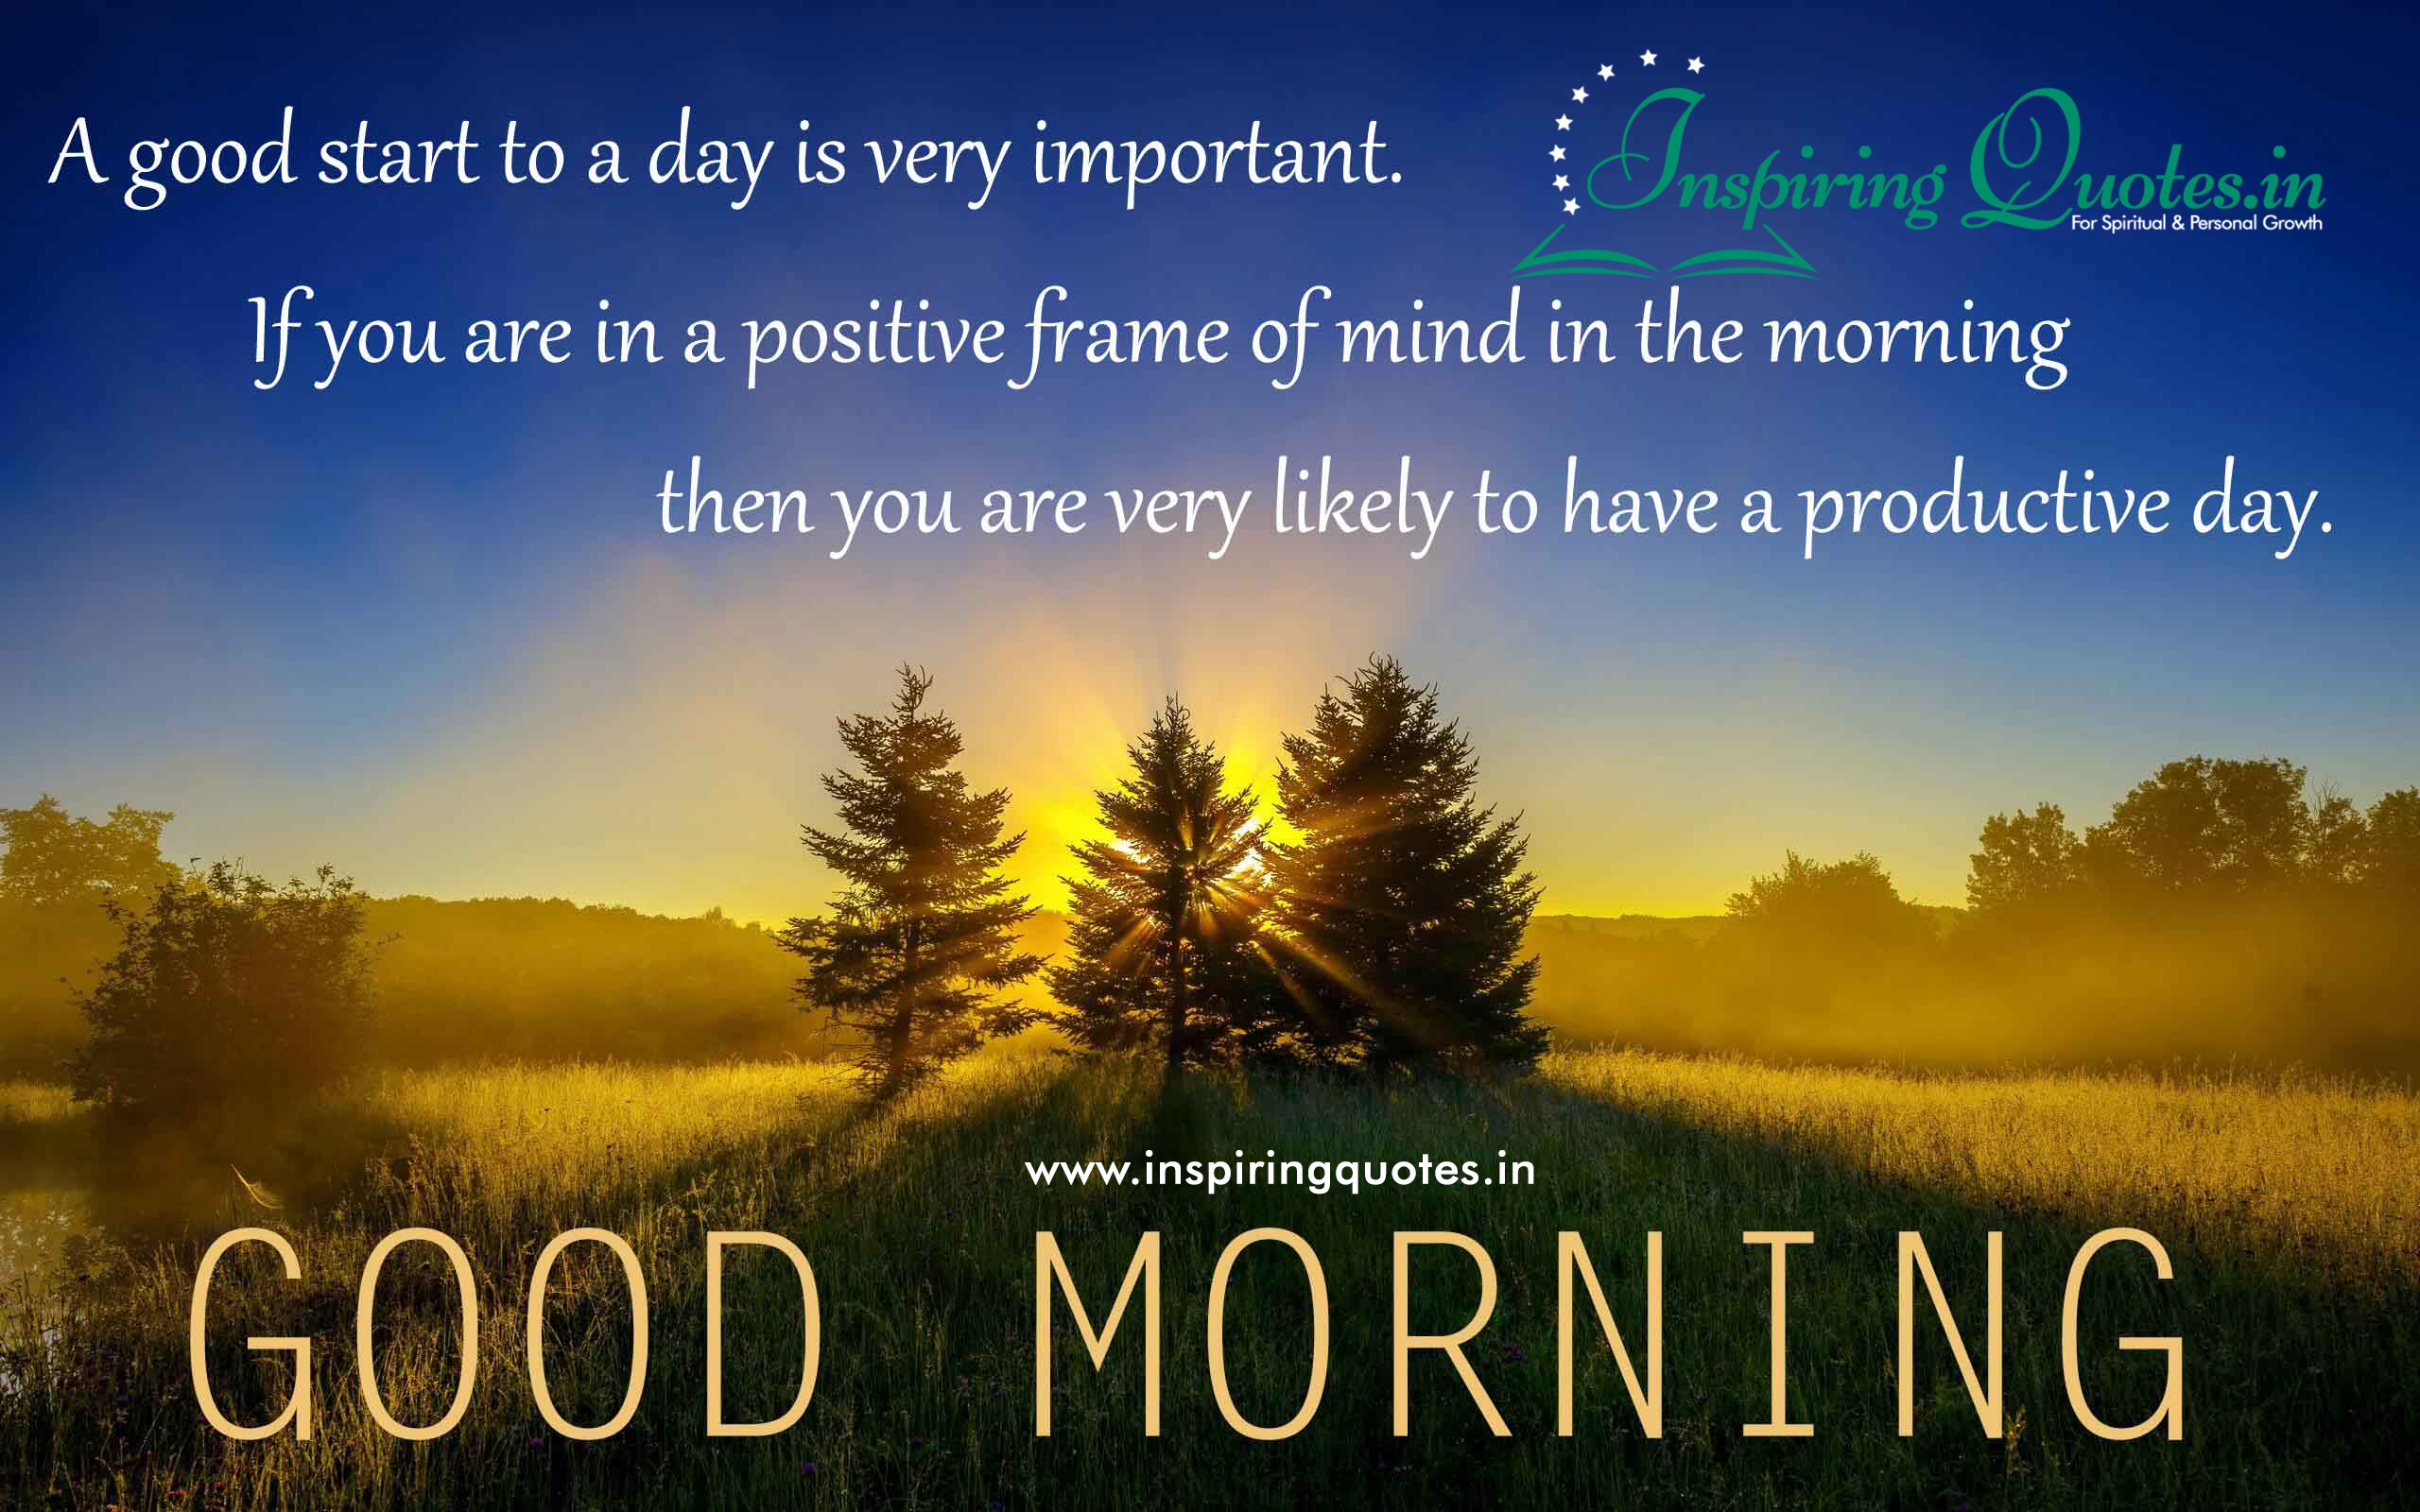 good-morning-lines-for-good-start-to-a-day-inspiring-quotes